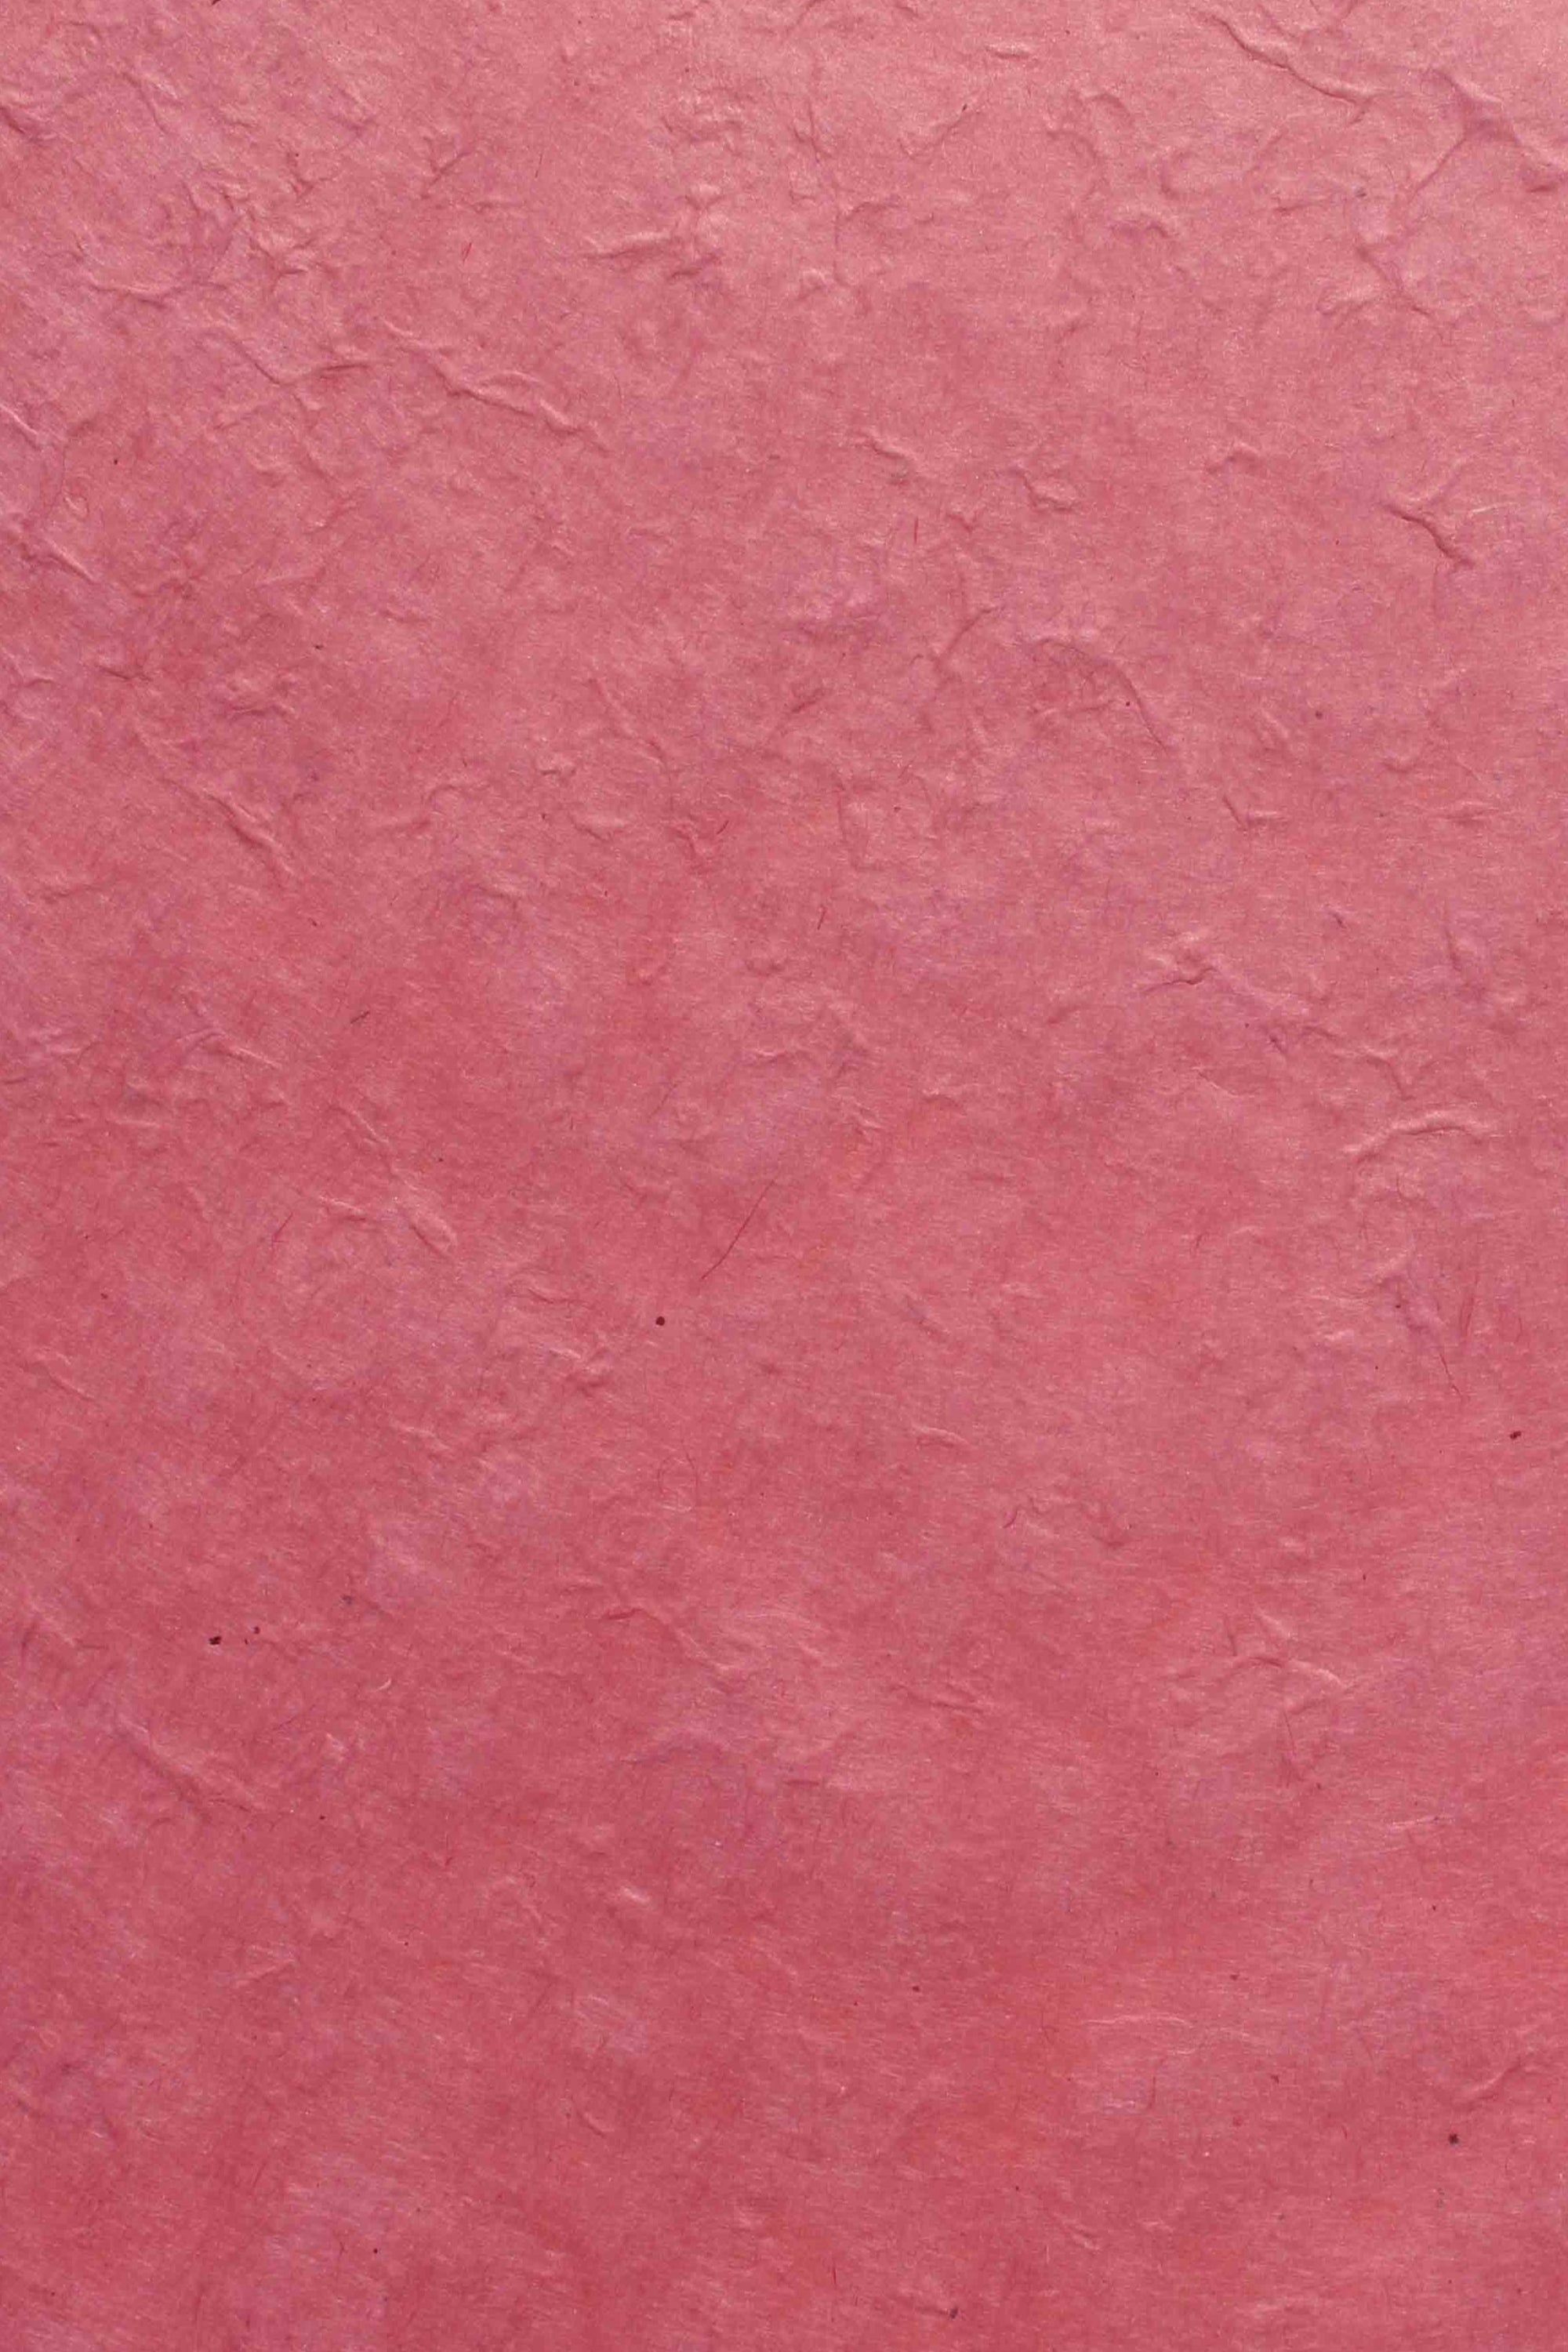 Nepalese Lokta Pink A4 - Liberties Papers